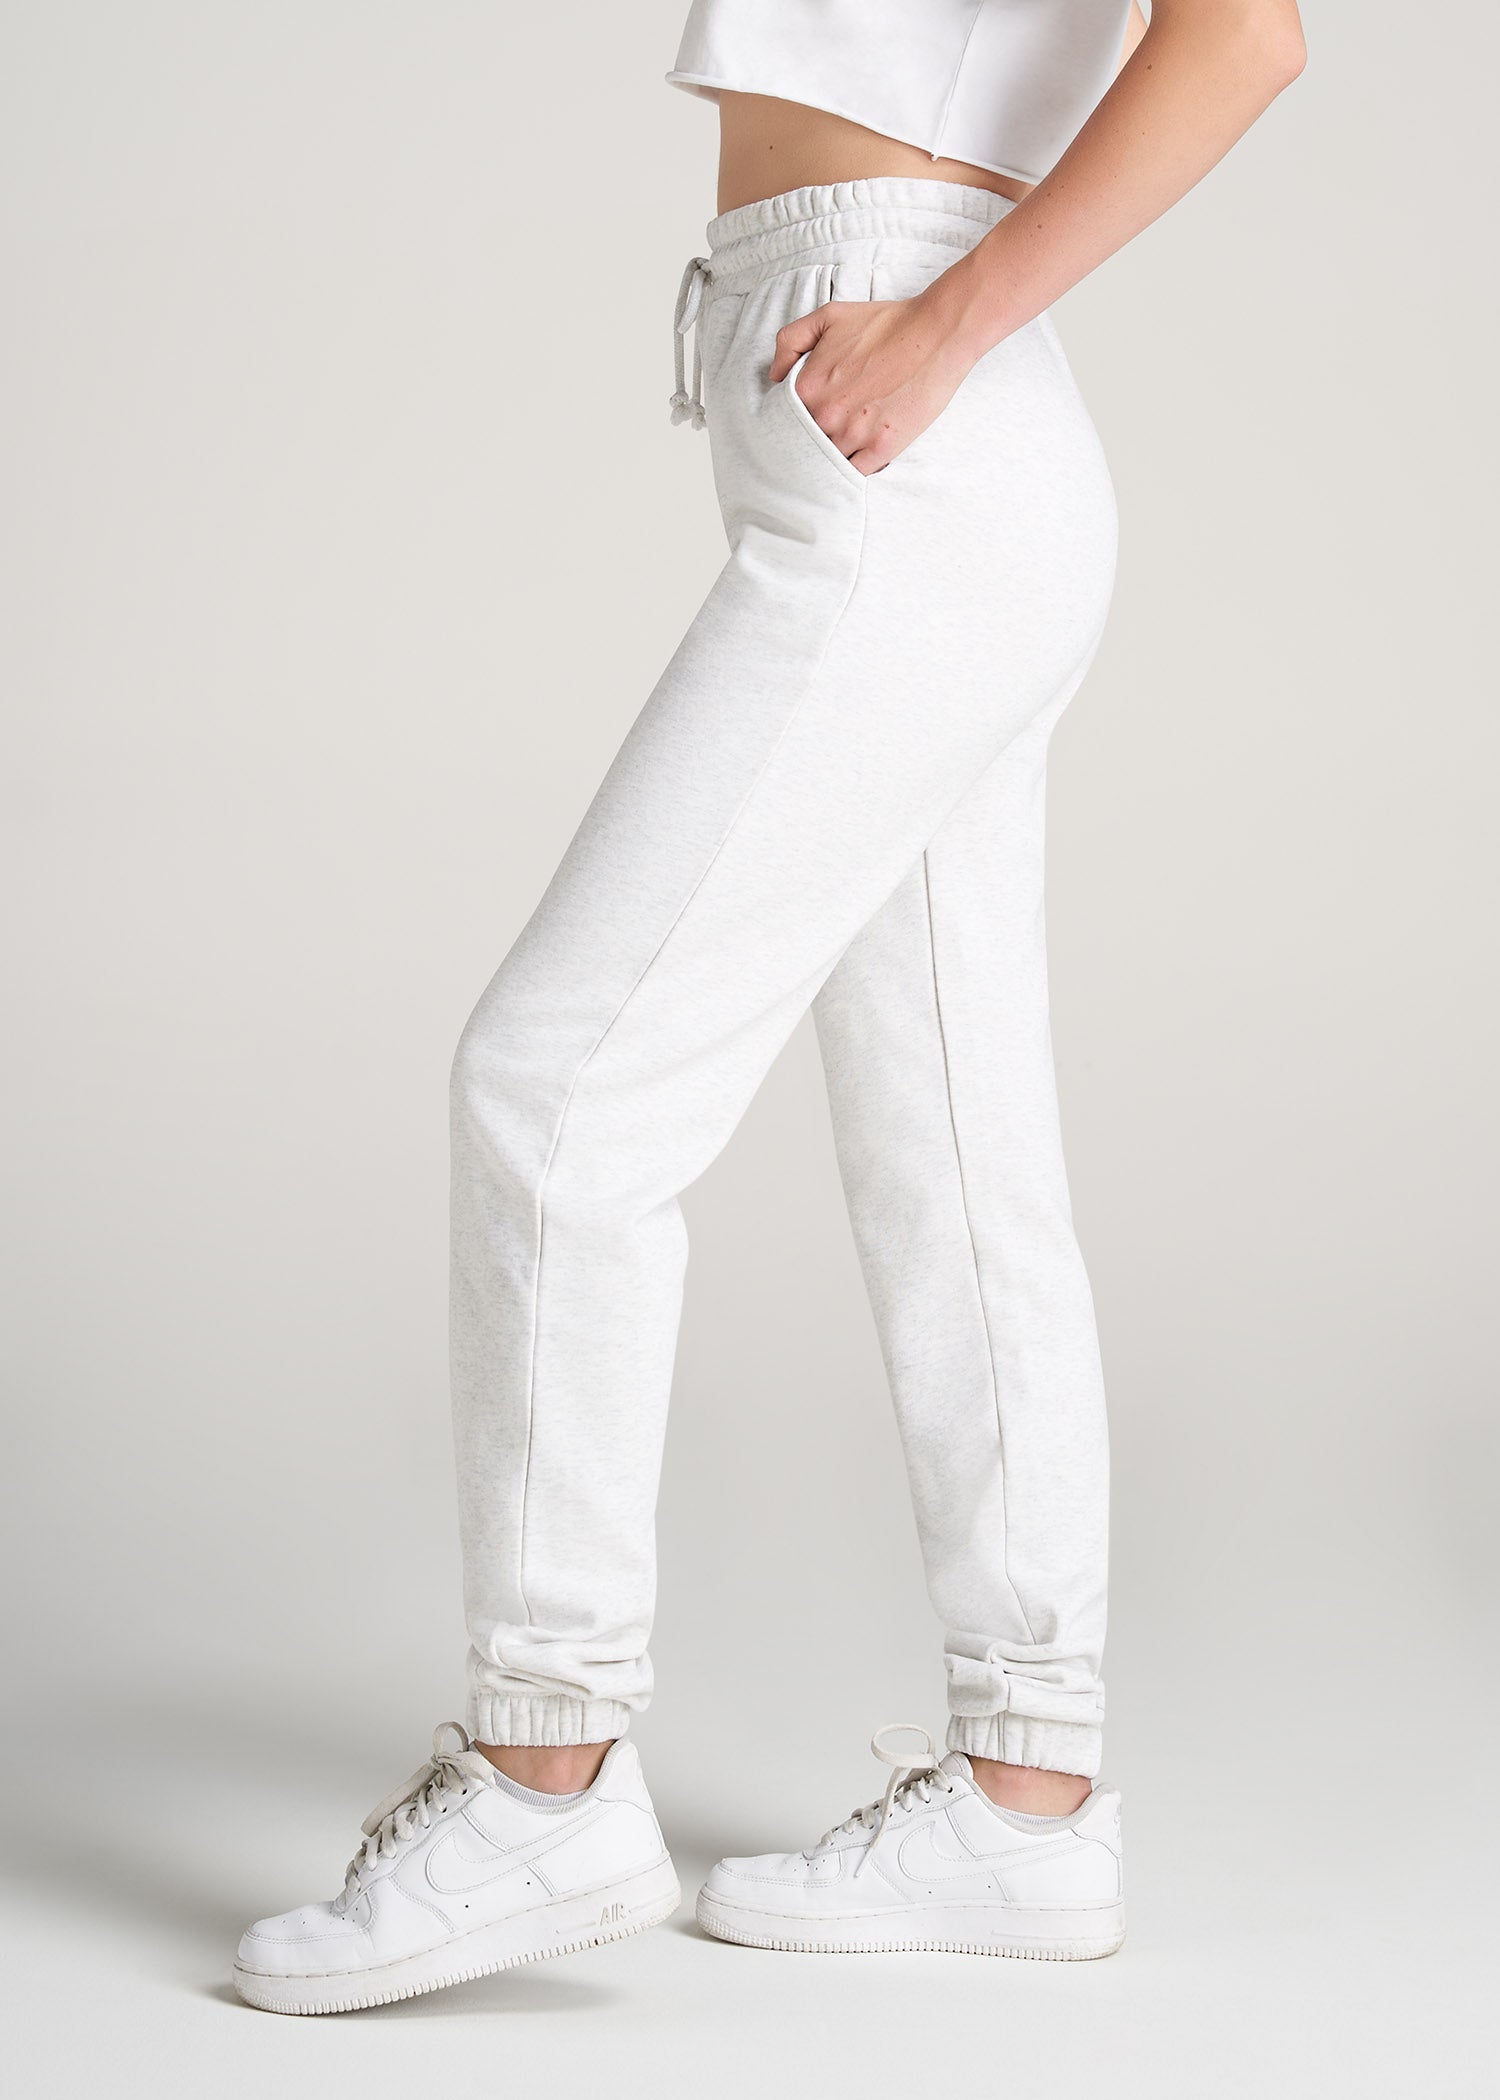 Tall Women's Fitted Sweatpants: High-Waisted White Sweatpants